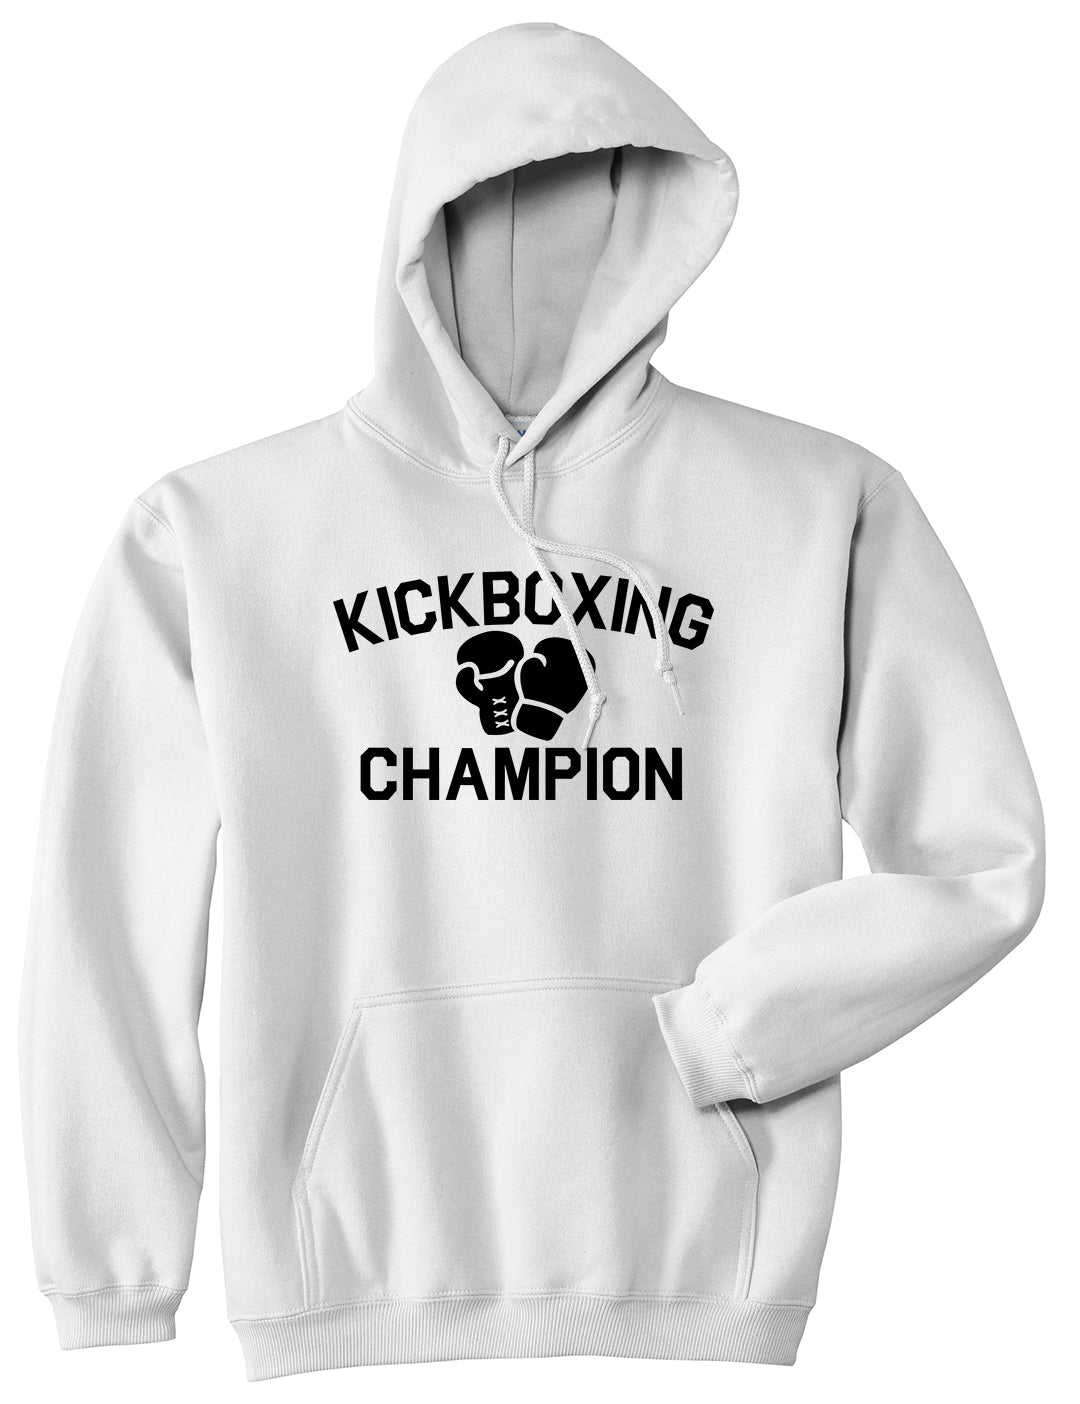 Kickboxing Champion Mens Pullover Hoodie White by Kings Of NY